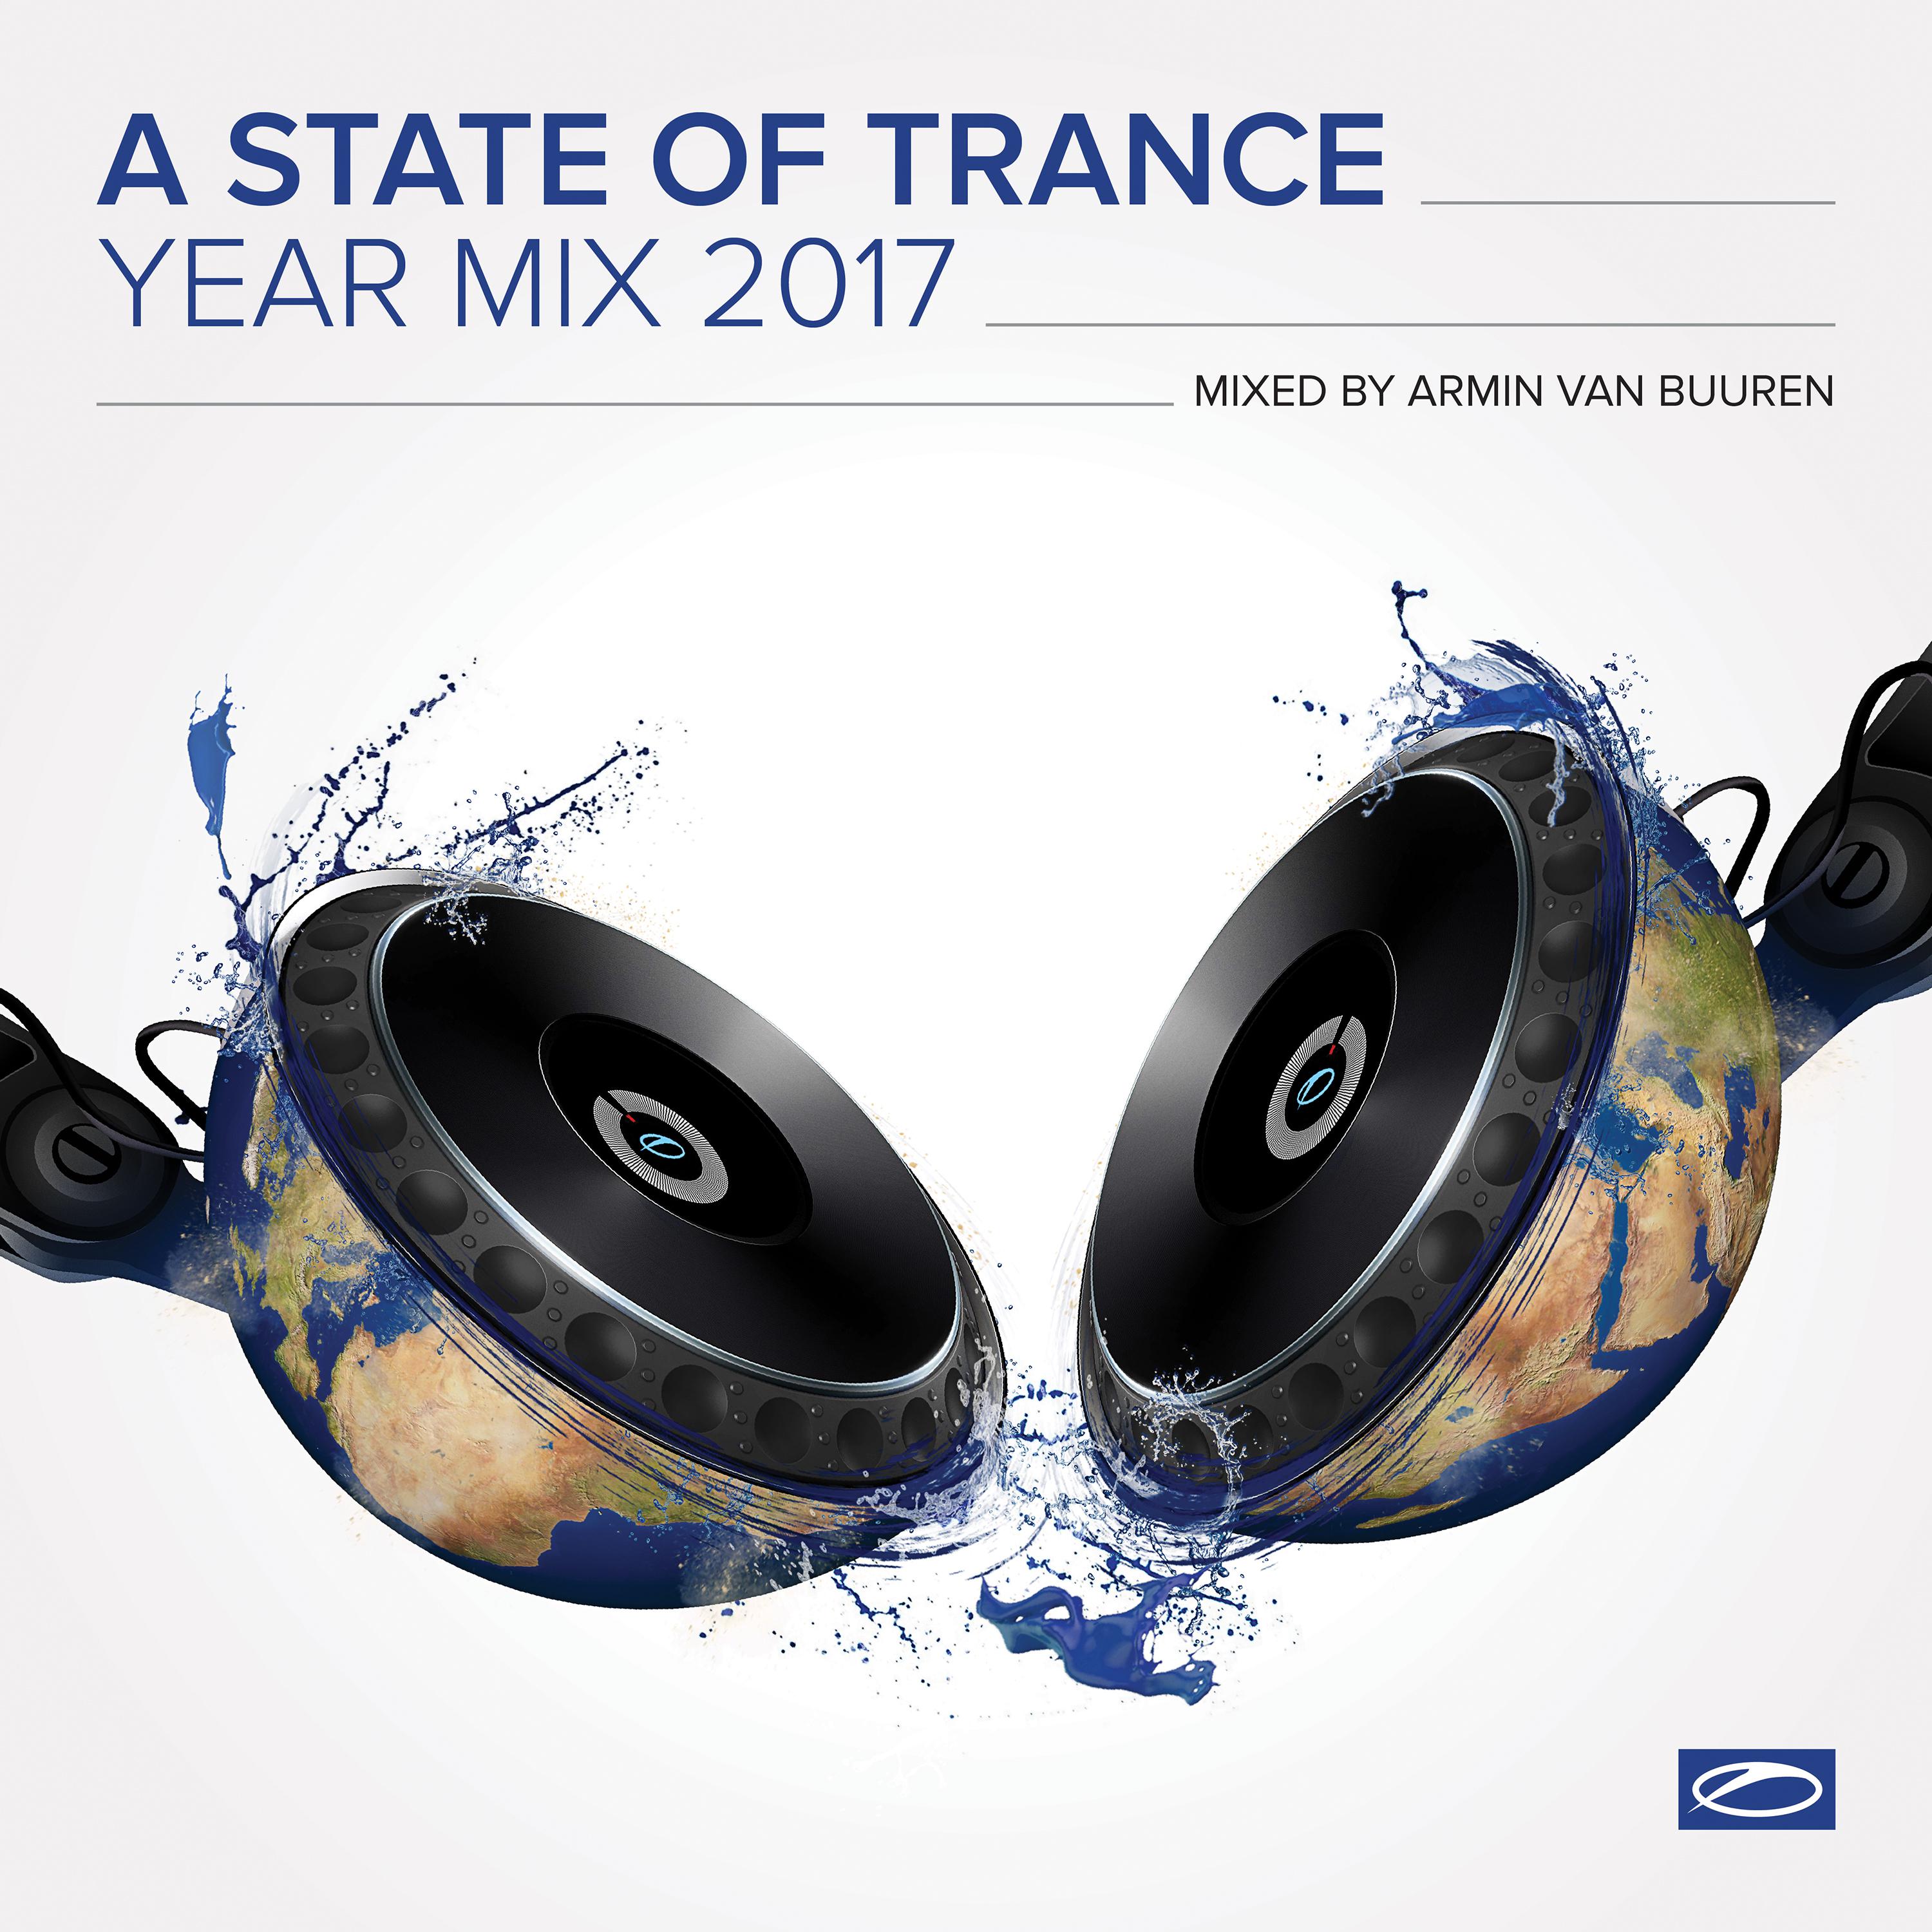 A State Of Trance Year Mix 2017 (Mixed by Armin van Buuren)